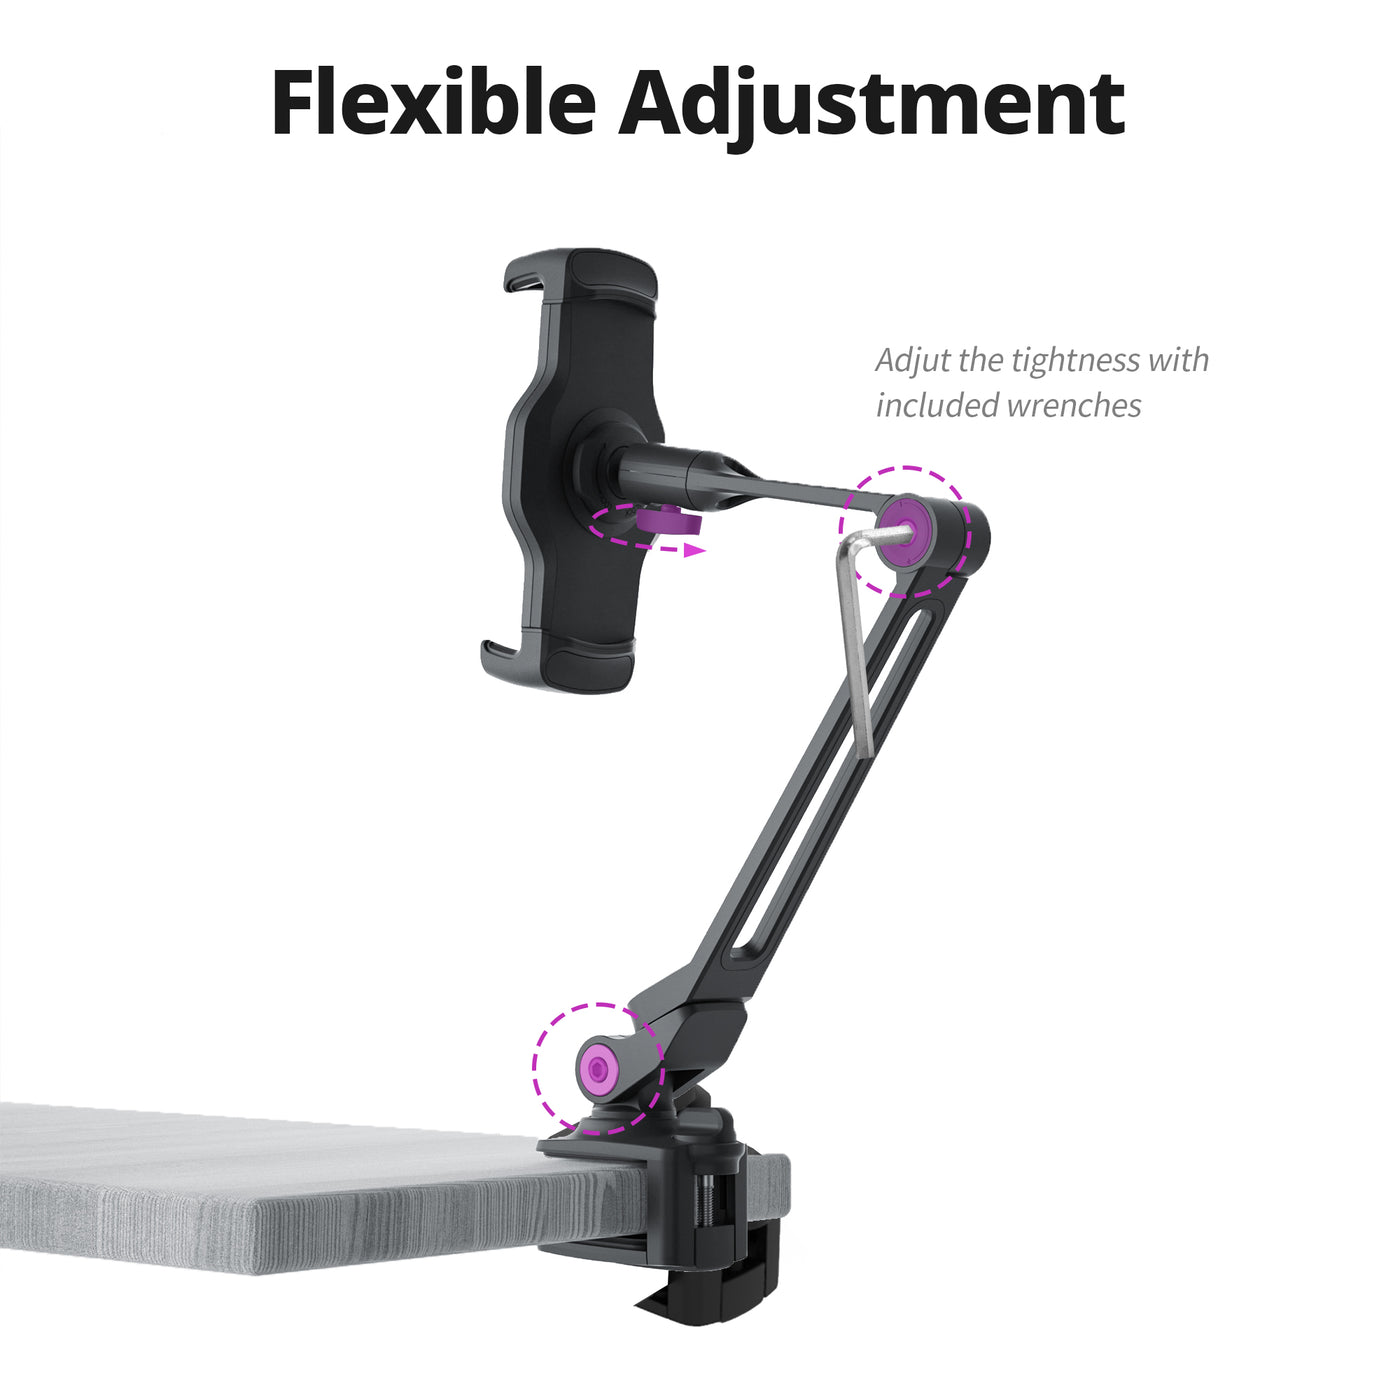 Smart Mount - Tablet & Cell Phone Holder (Long Arm/Clamp Base)